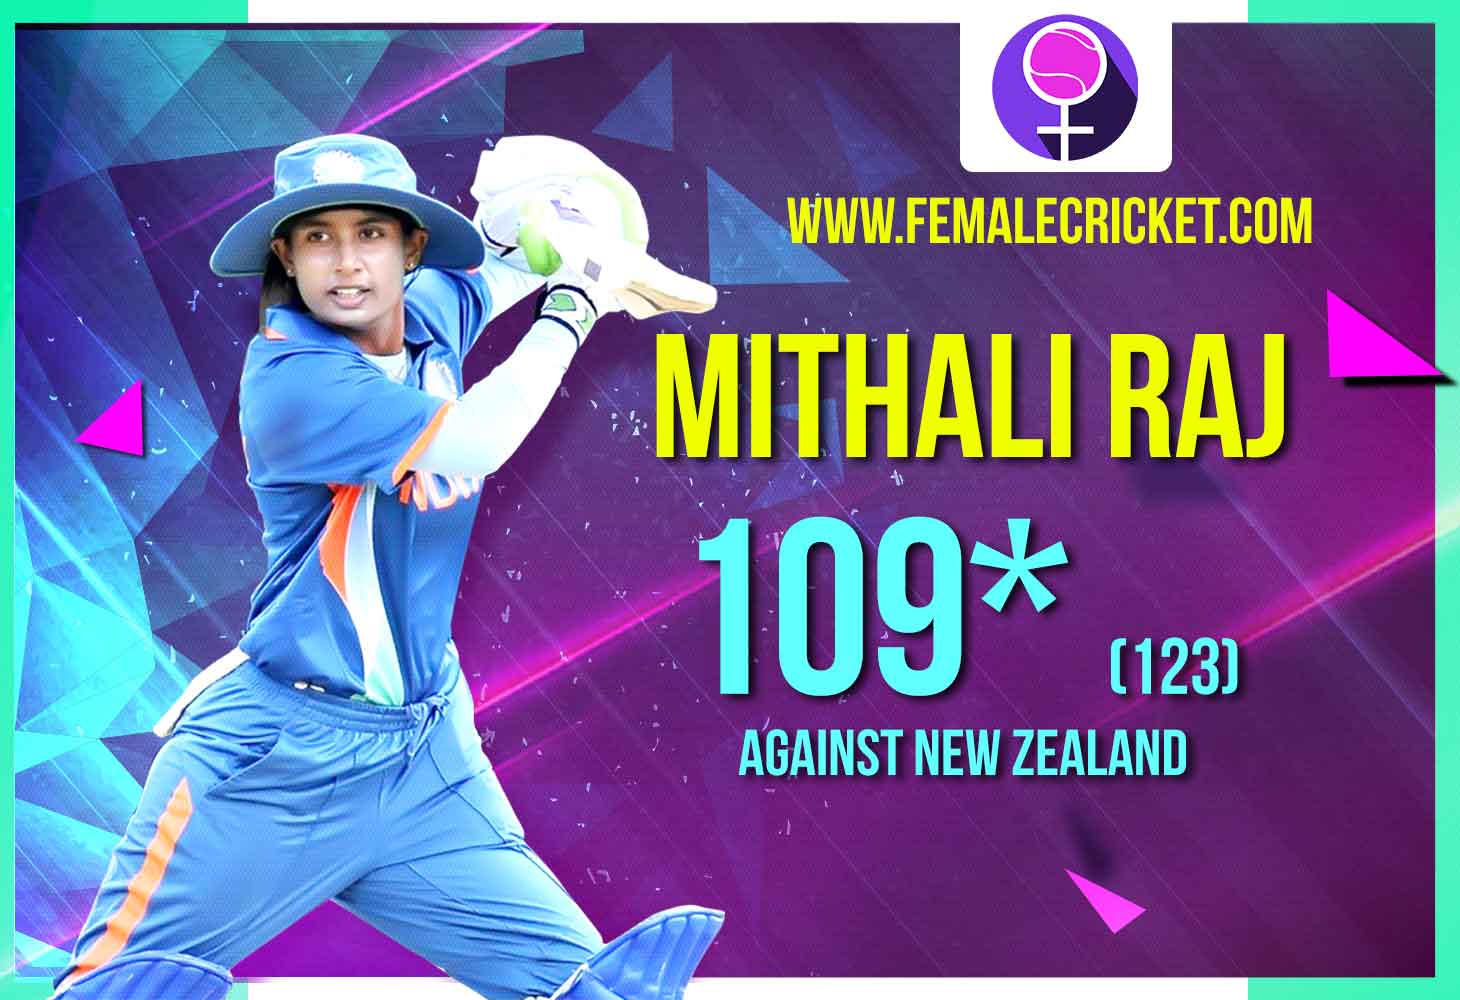 Magnificent Mithali takes India women to Semi-Finals of World Cup 2017